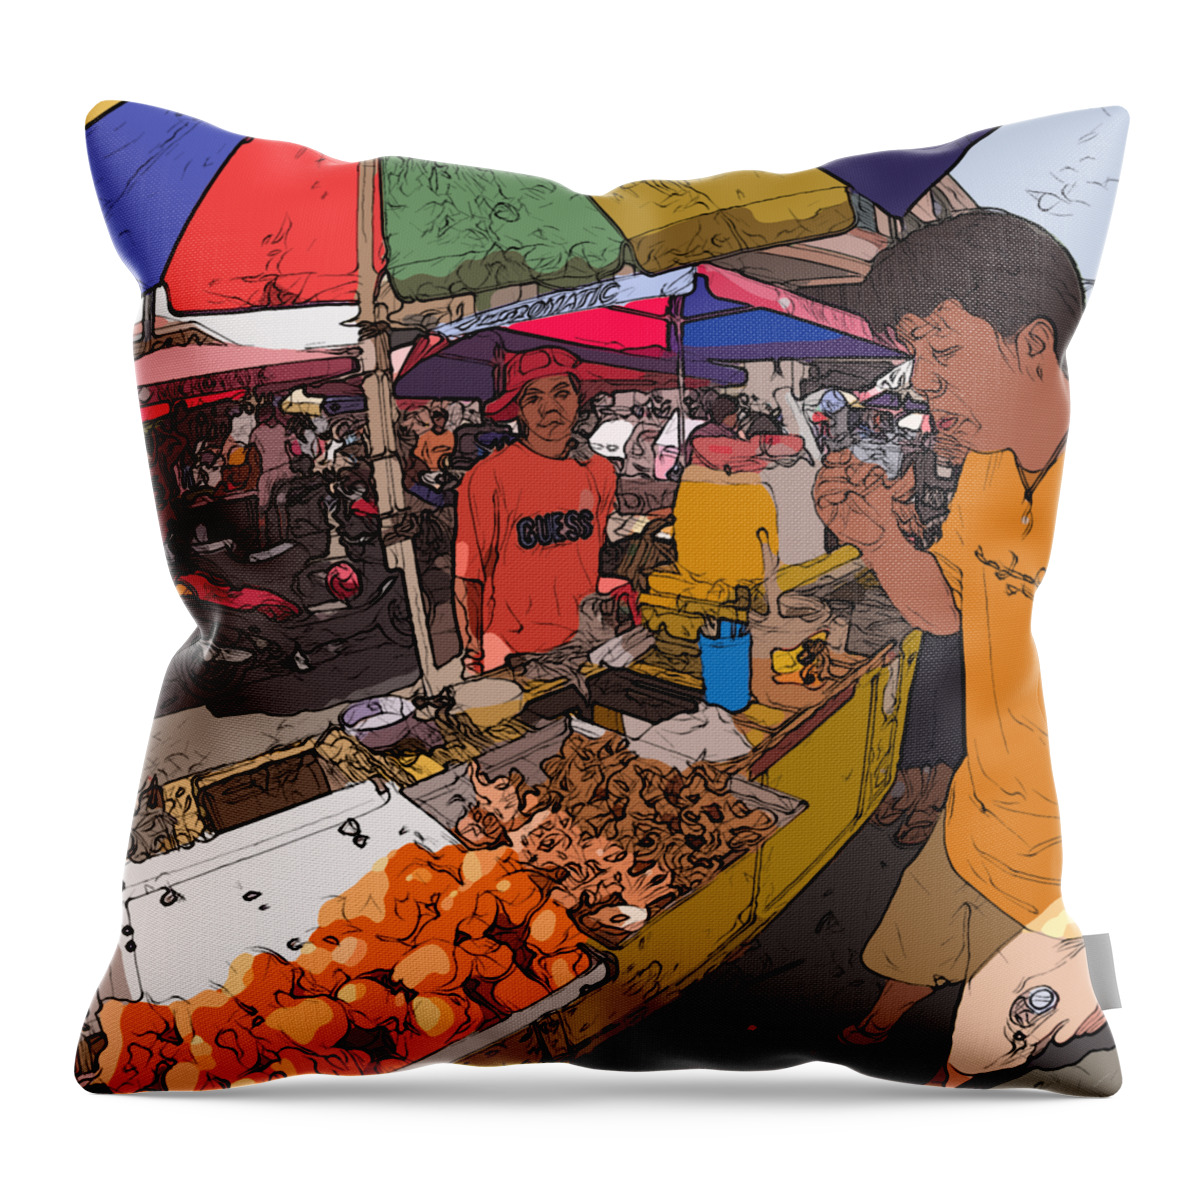 Philippines Throw Pillow featuring the painting Philippines 1299 Street Food by Rolf Bertram